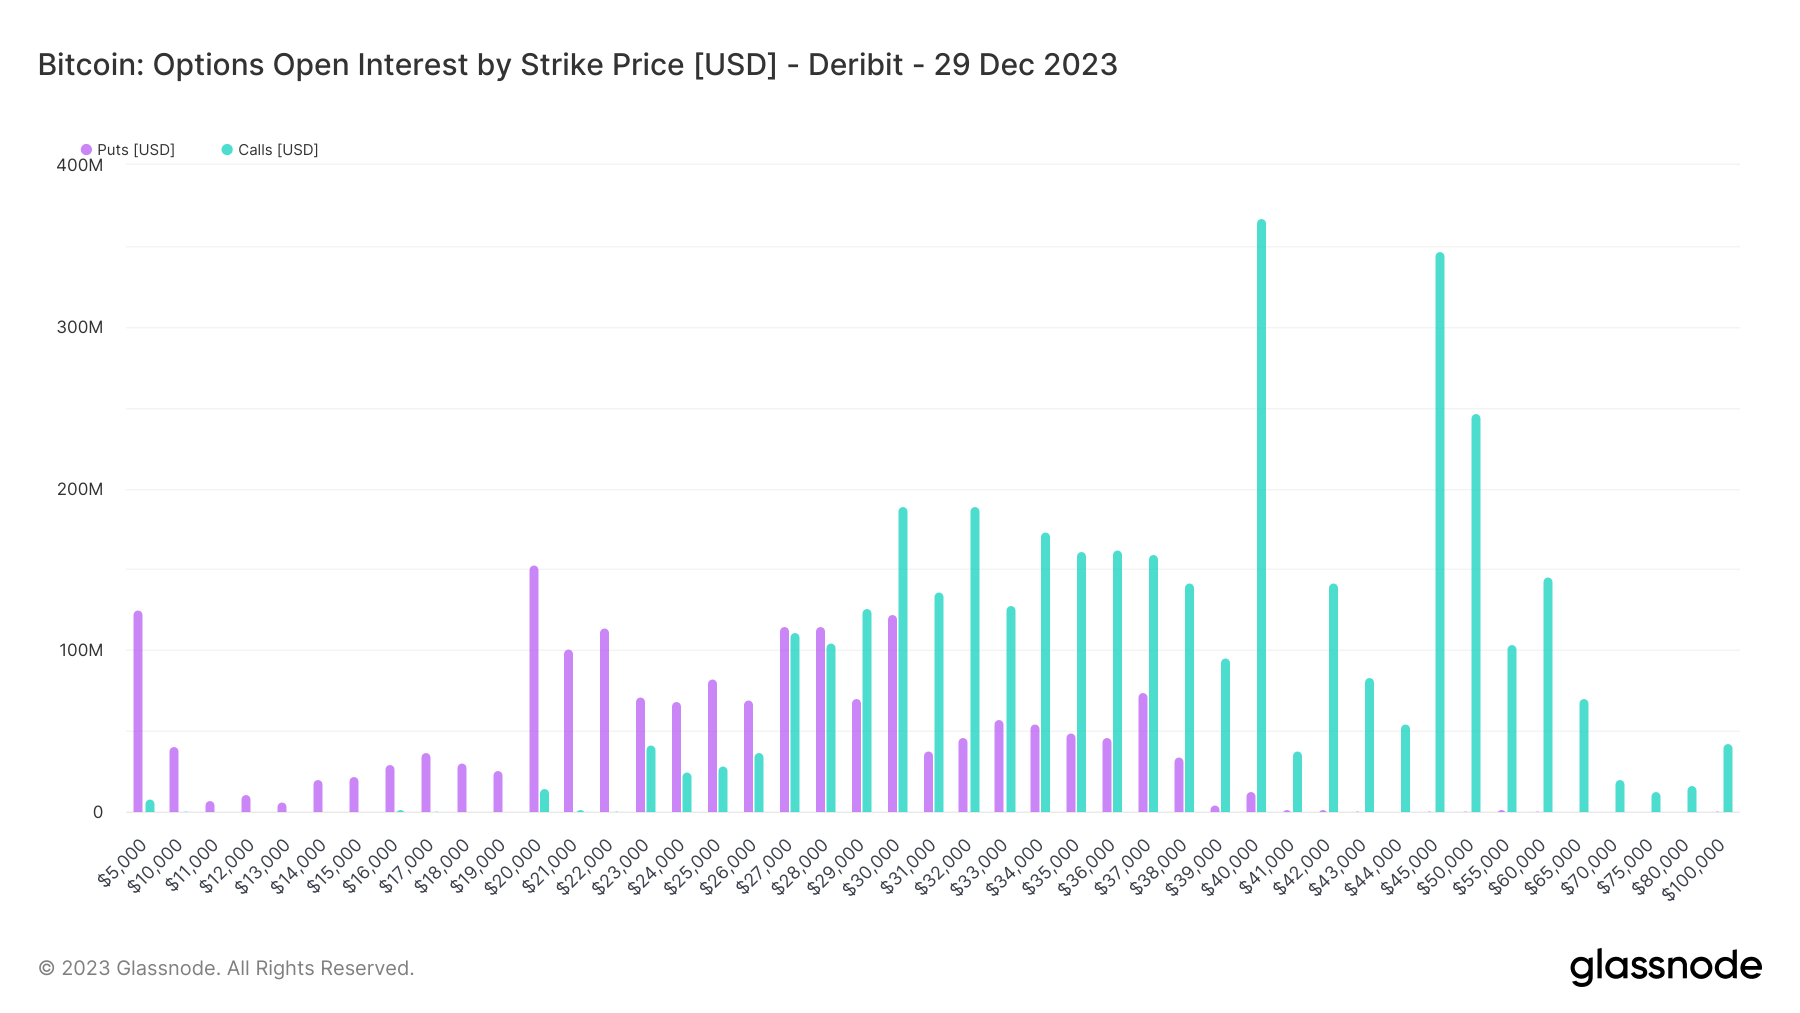 Options Open Interest By Strike Price: (Source: Glassnode)